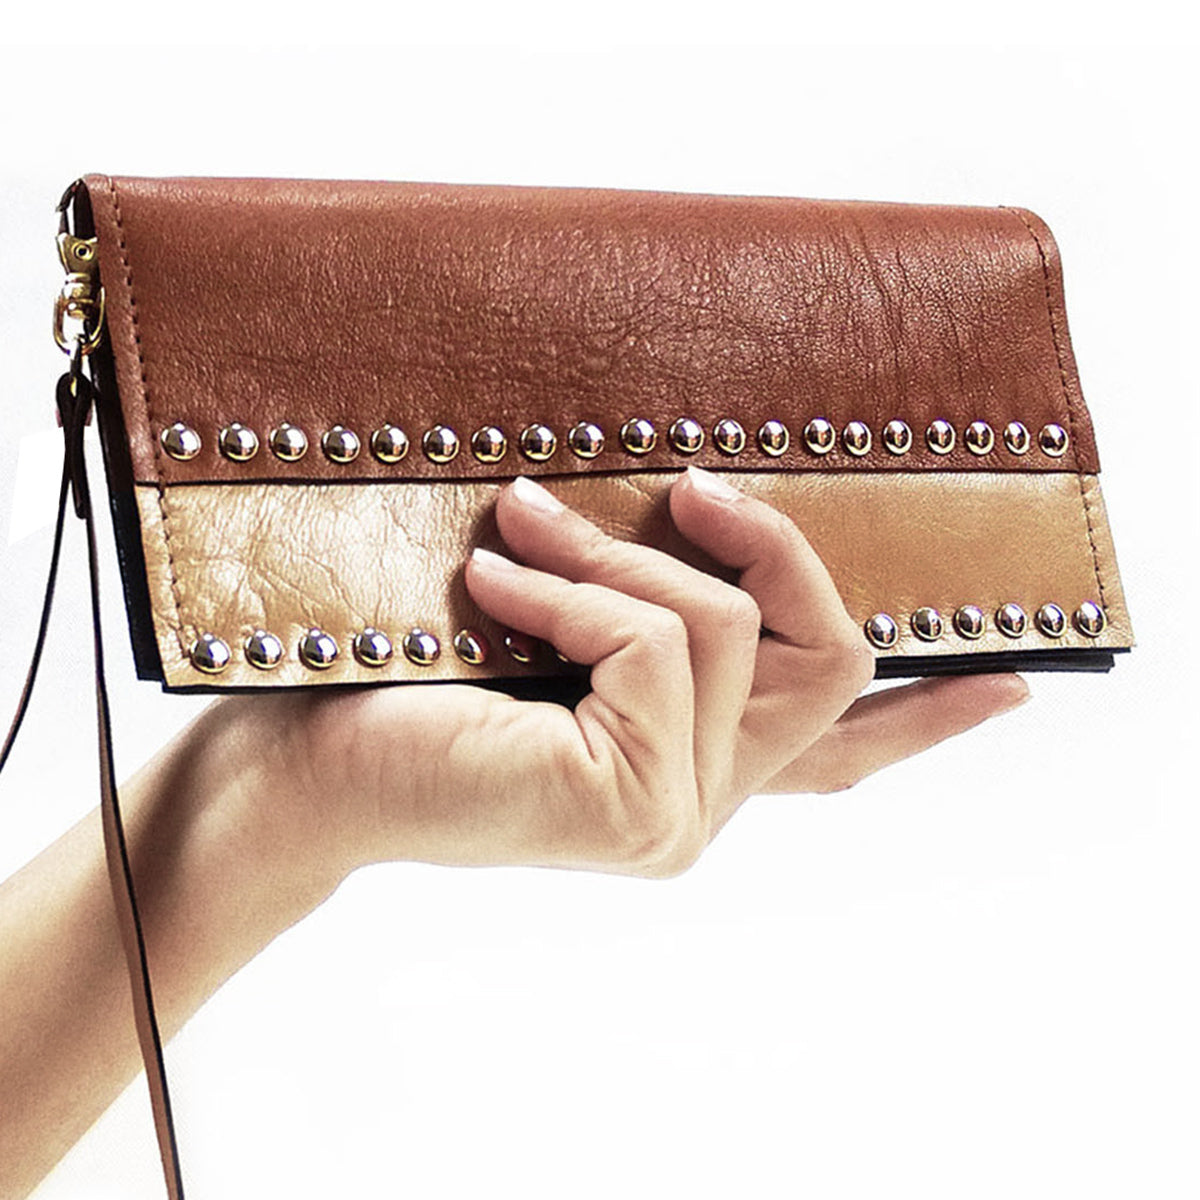 Red leather clutch wallet with studs | Narciso